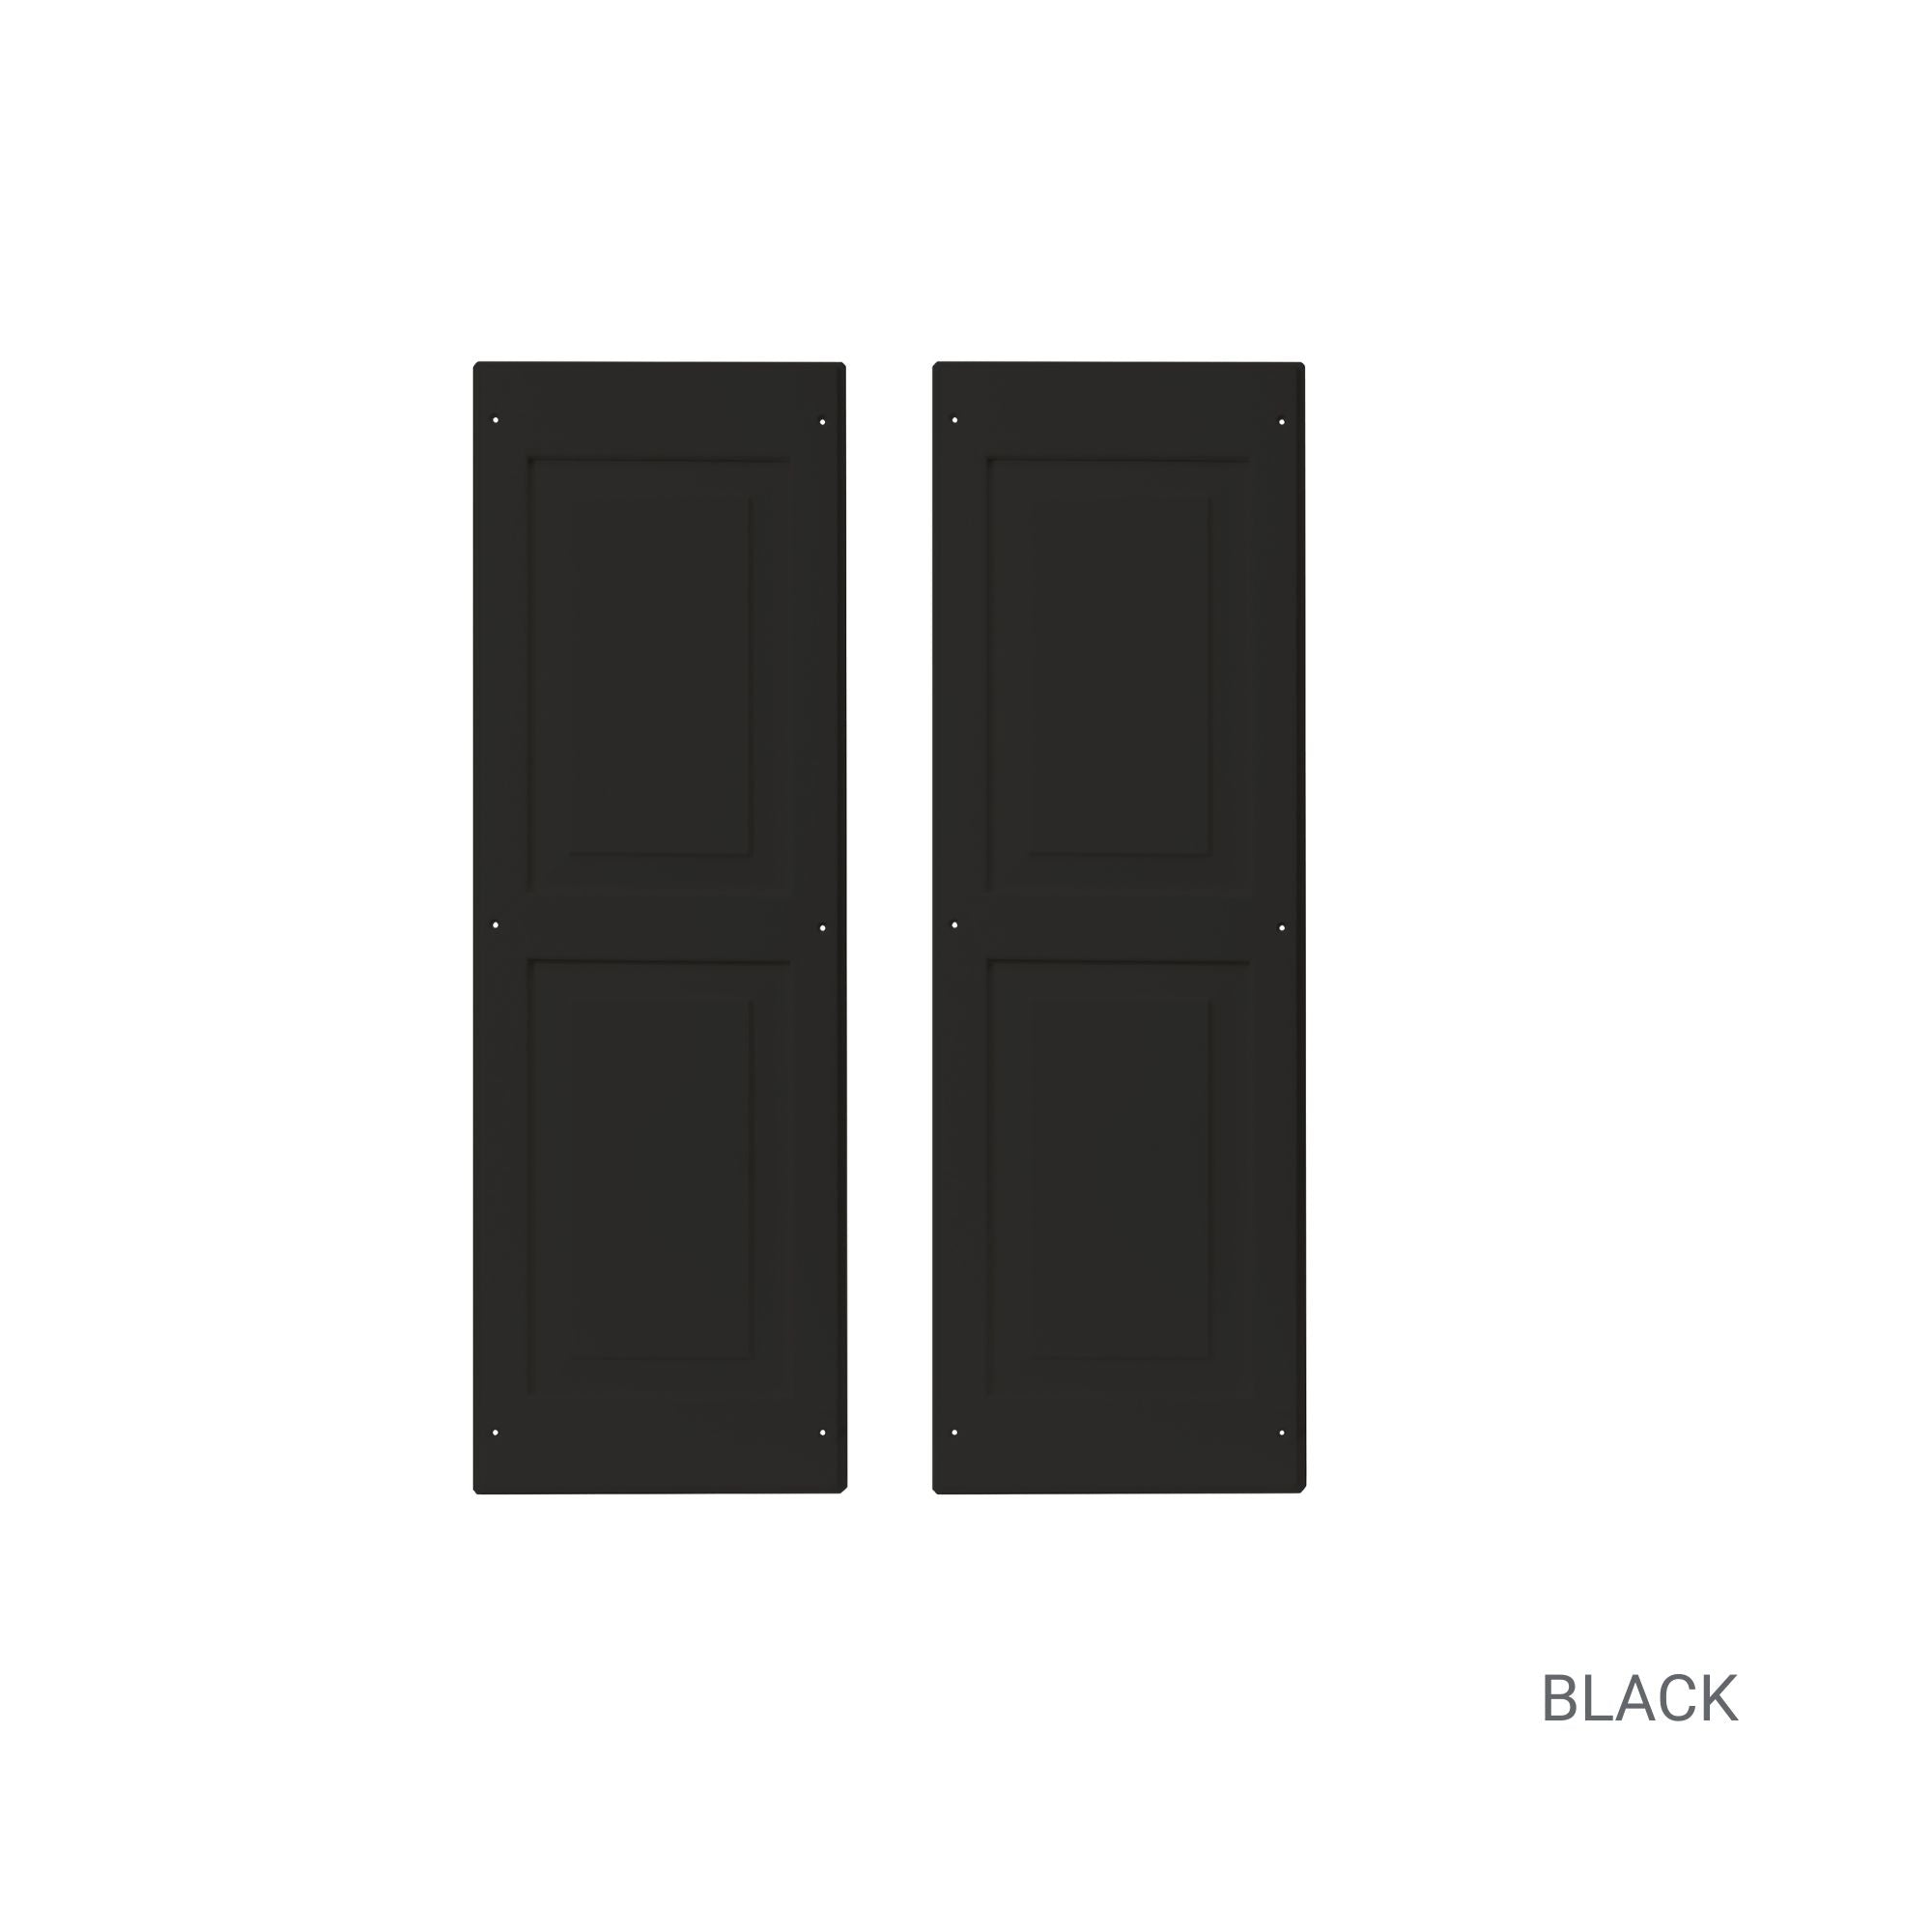 Pair of 12" W x 36" H Raised Panel Black Shutters for Sheds, Playhouses, and MORE